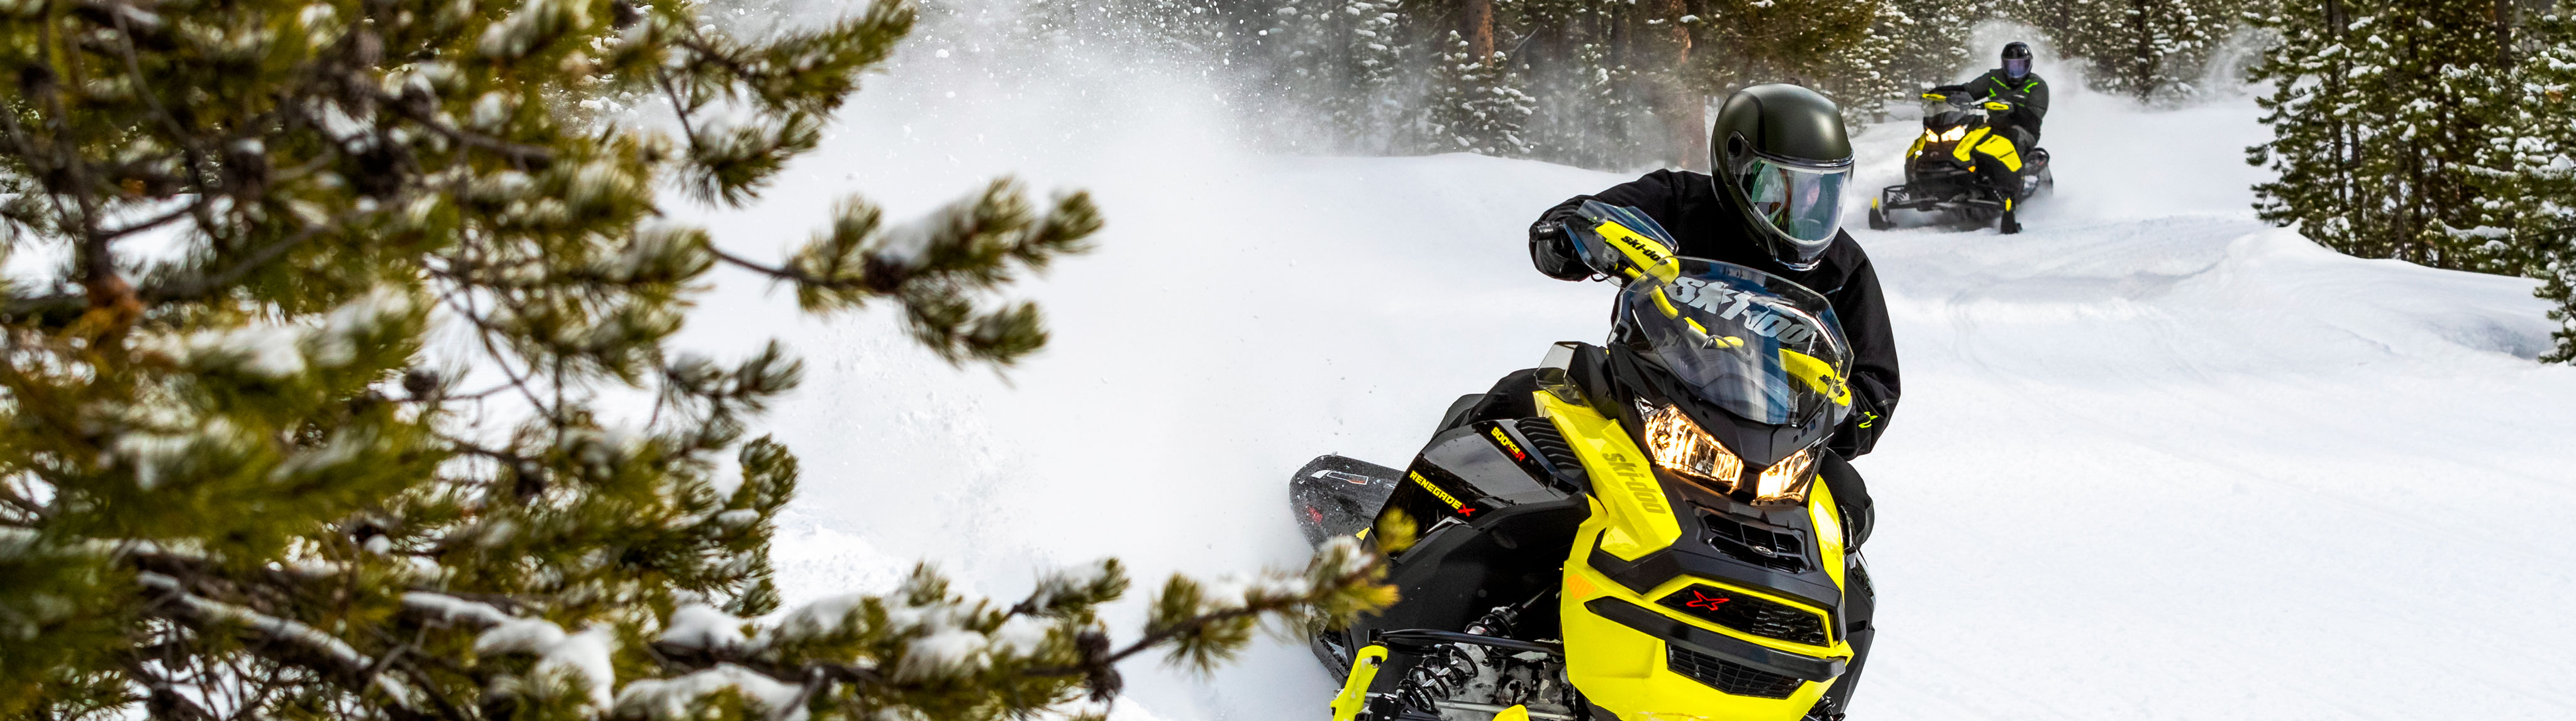 DO YOU NEED A LICENSE TO RIDE A SNOWMOBILE?